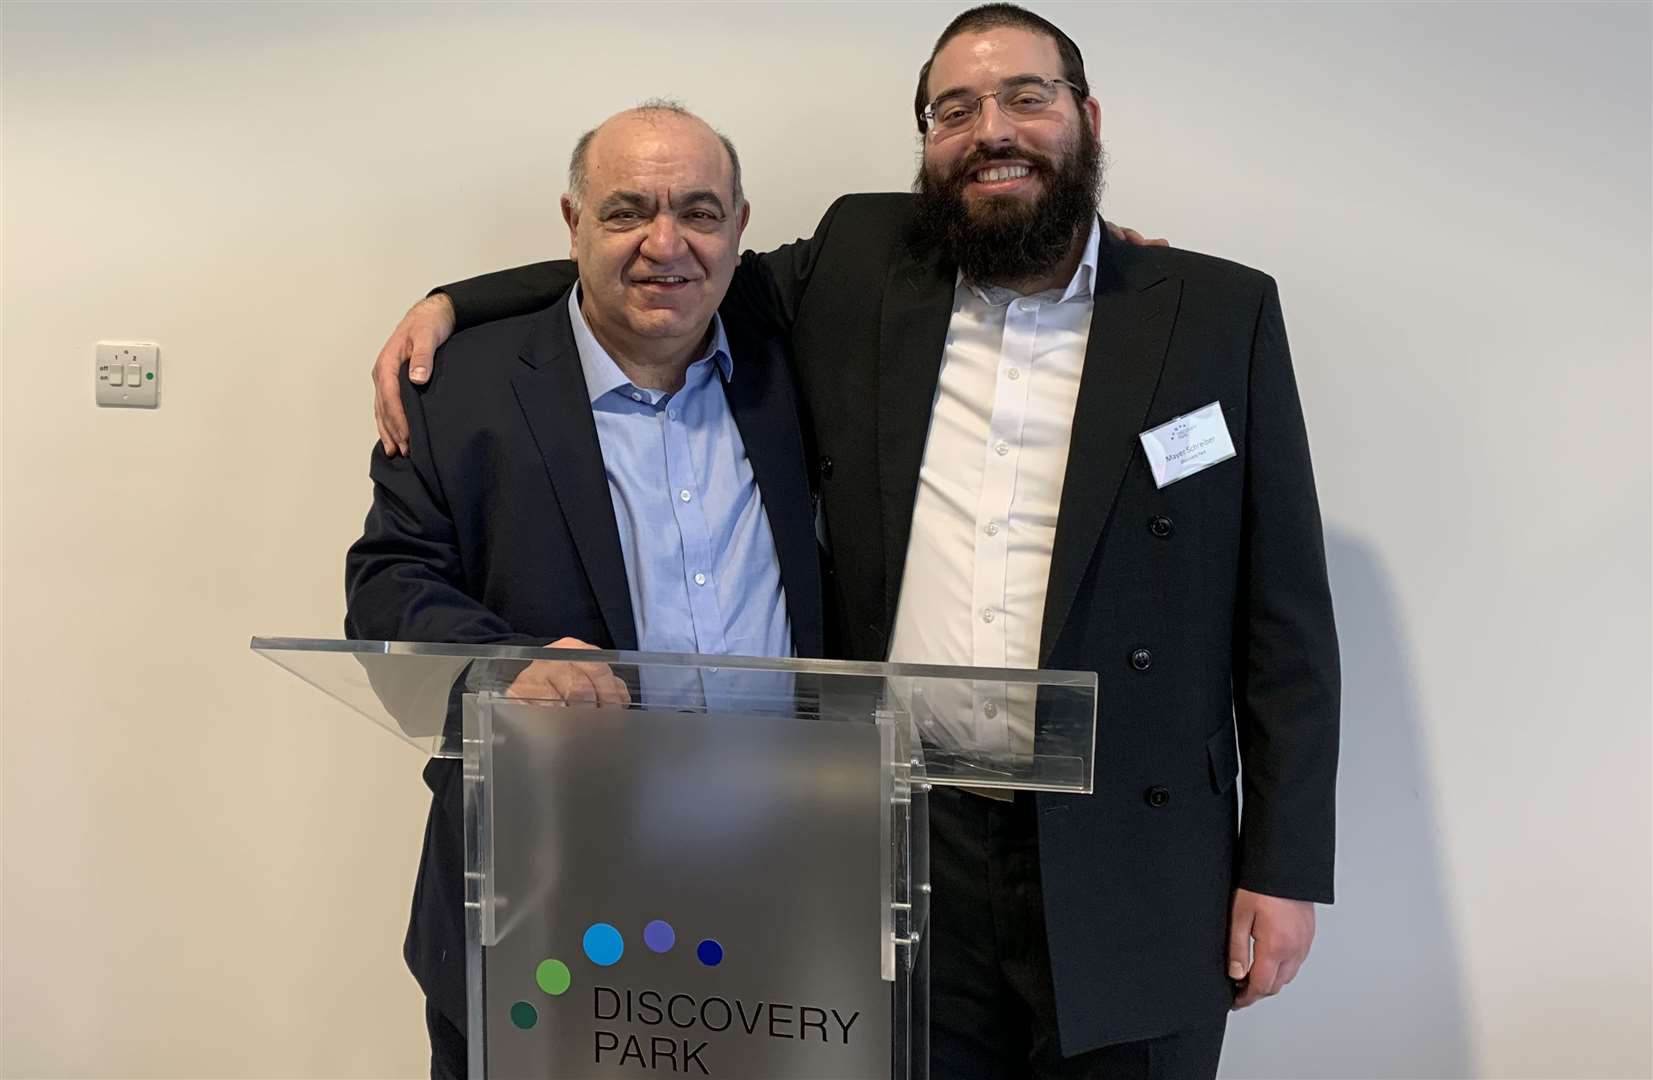 Discovery Park’s chairman Dr Martino Picardo and CEO Mayer Schreiber are delighted with the new status